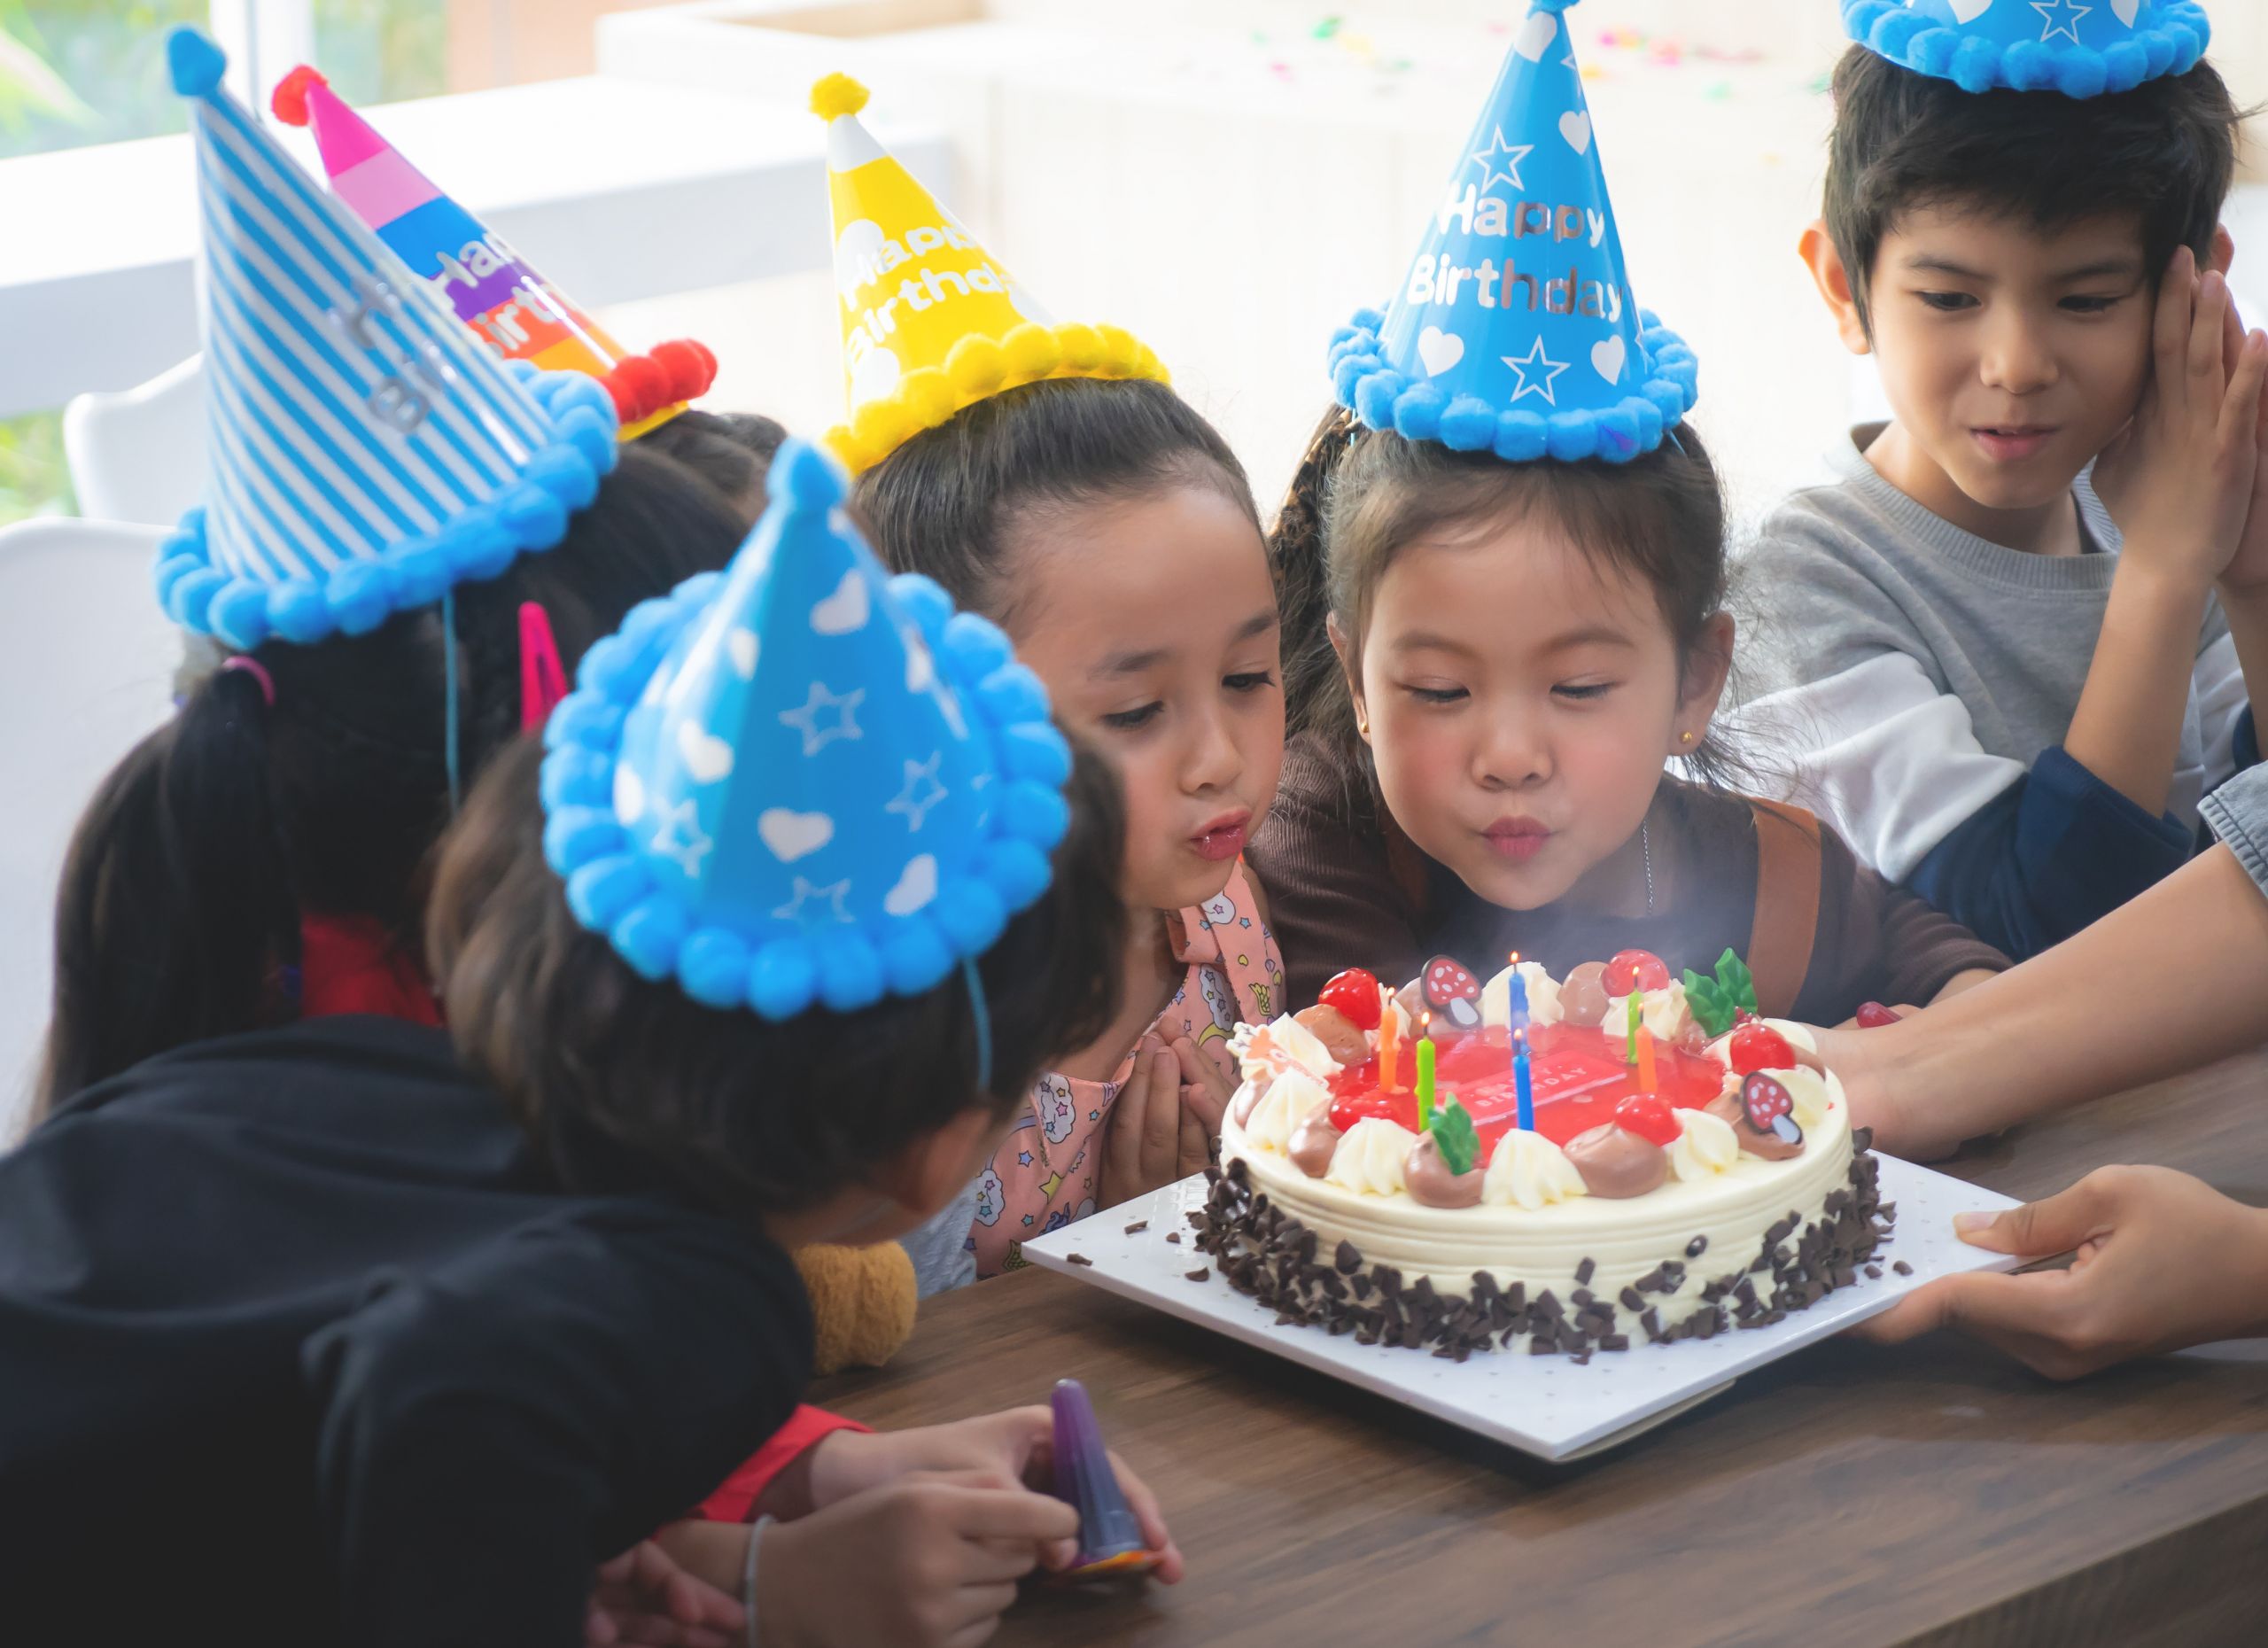 Kids Birthday Party Places
 Top 16 Kids Birthday Party Places in the Bay Area